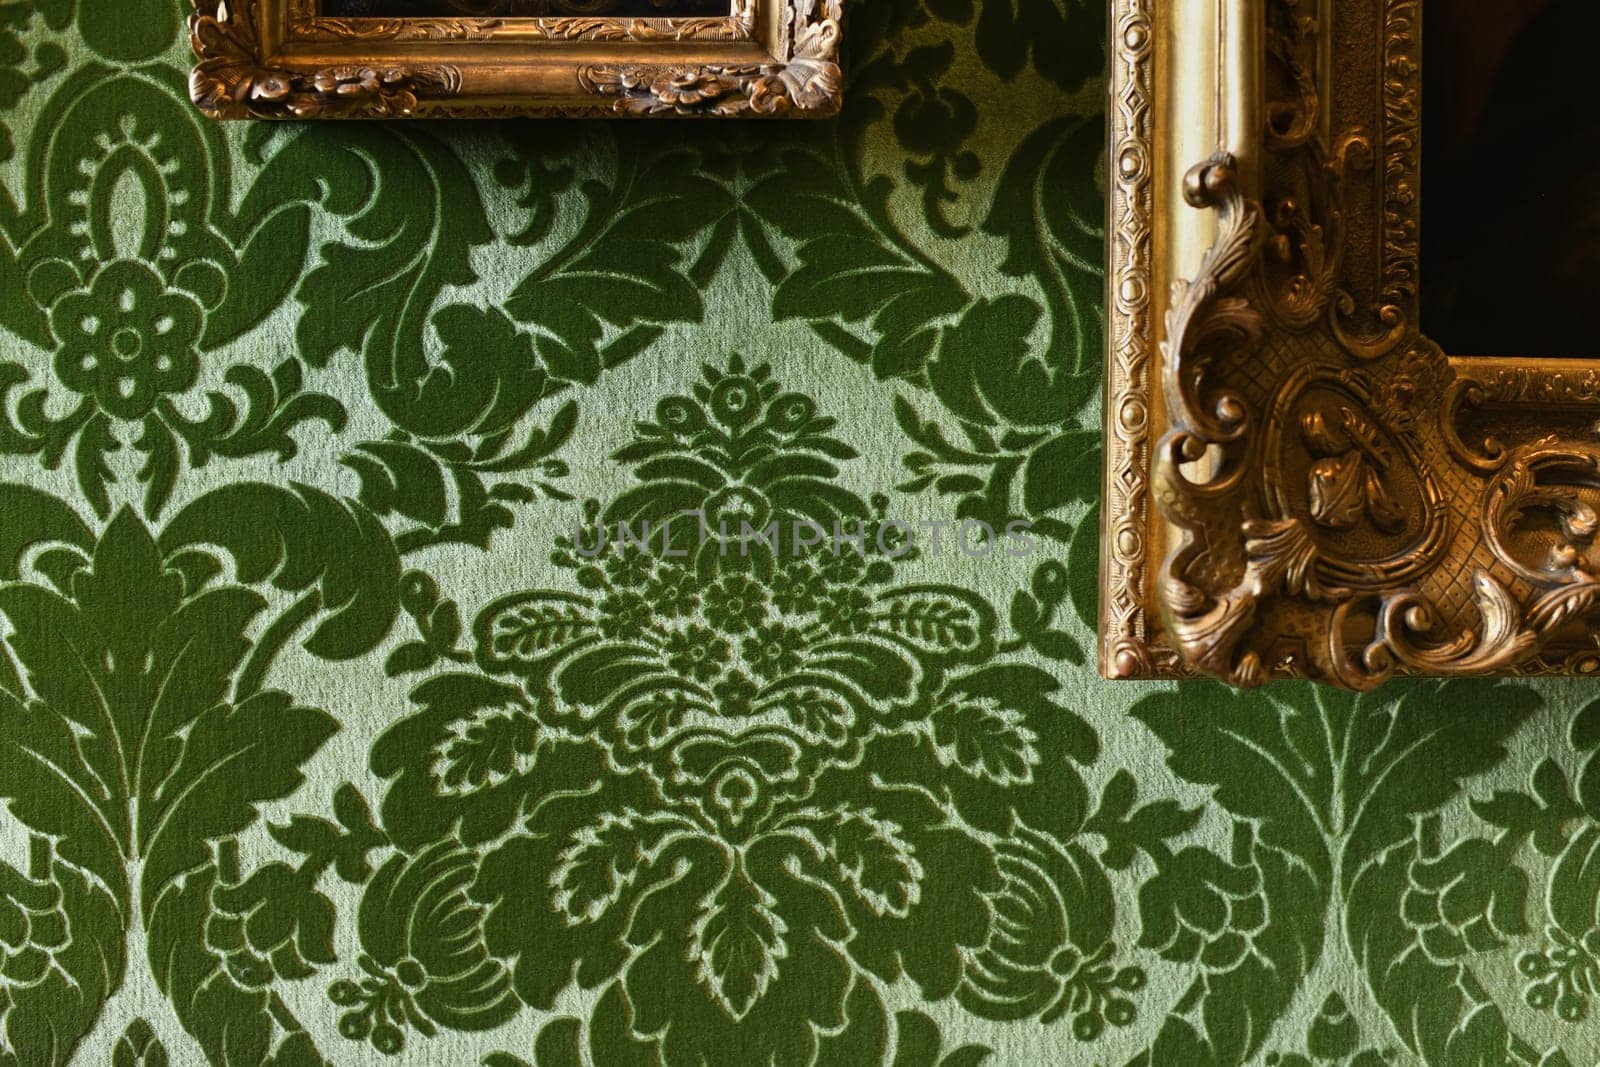 Green velvet wallpaper and gold frames with paintings in castle